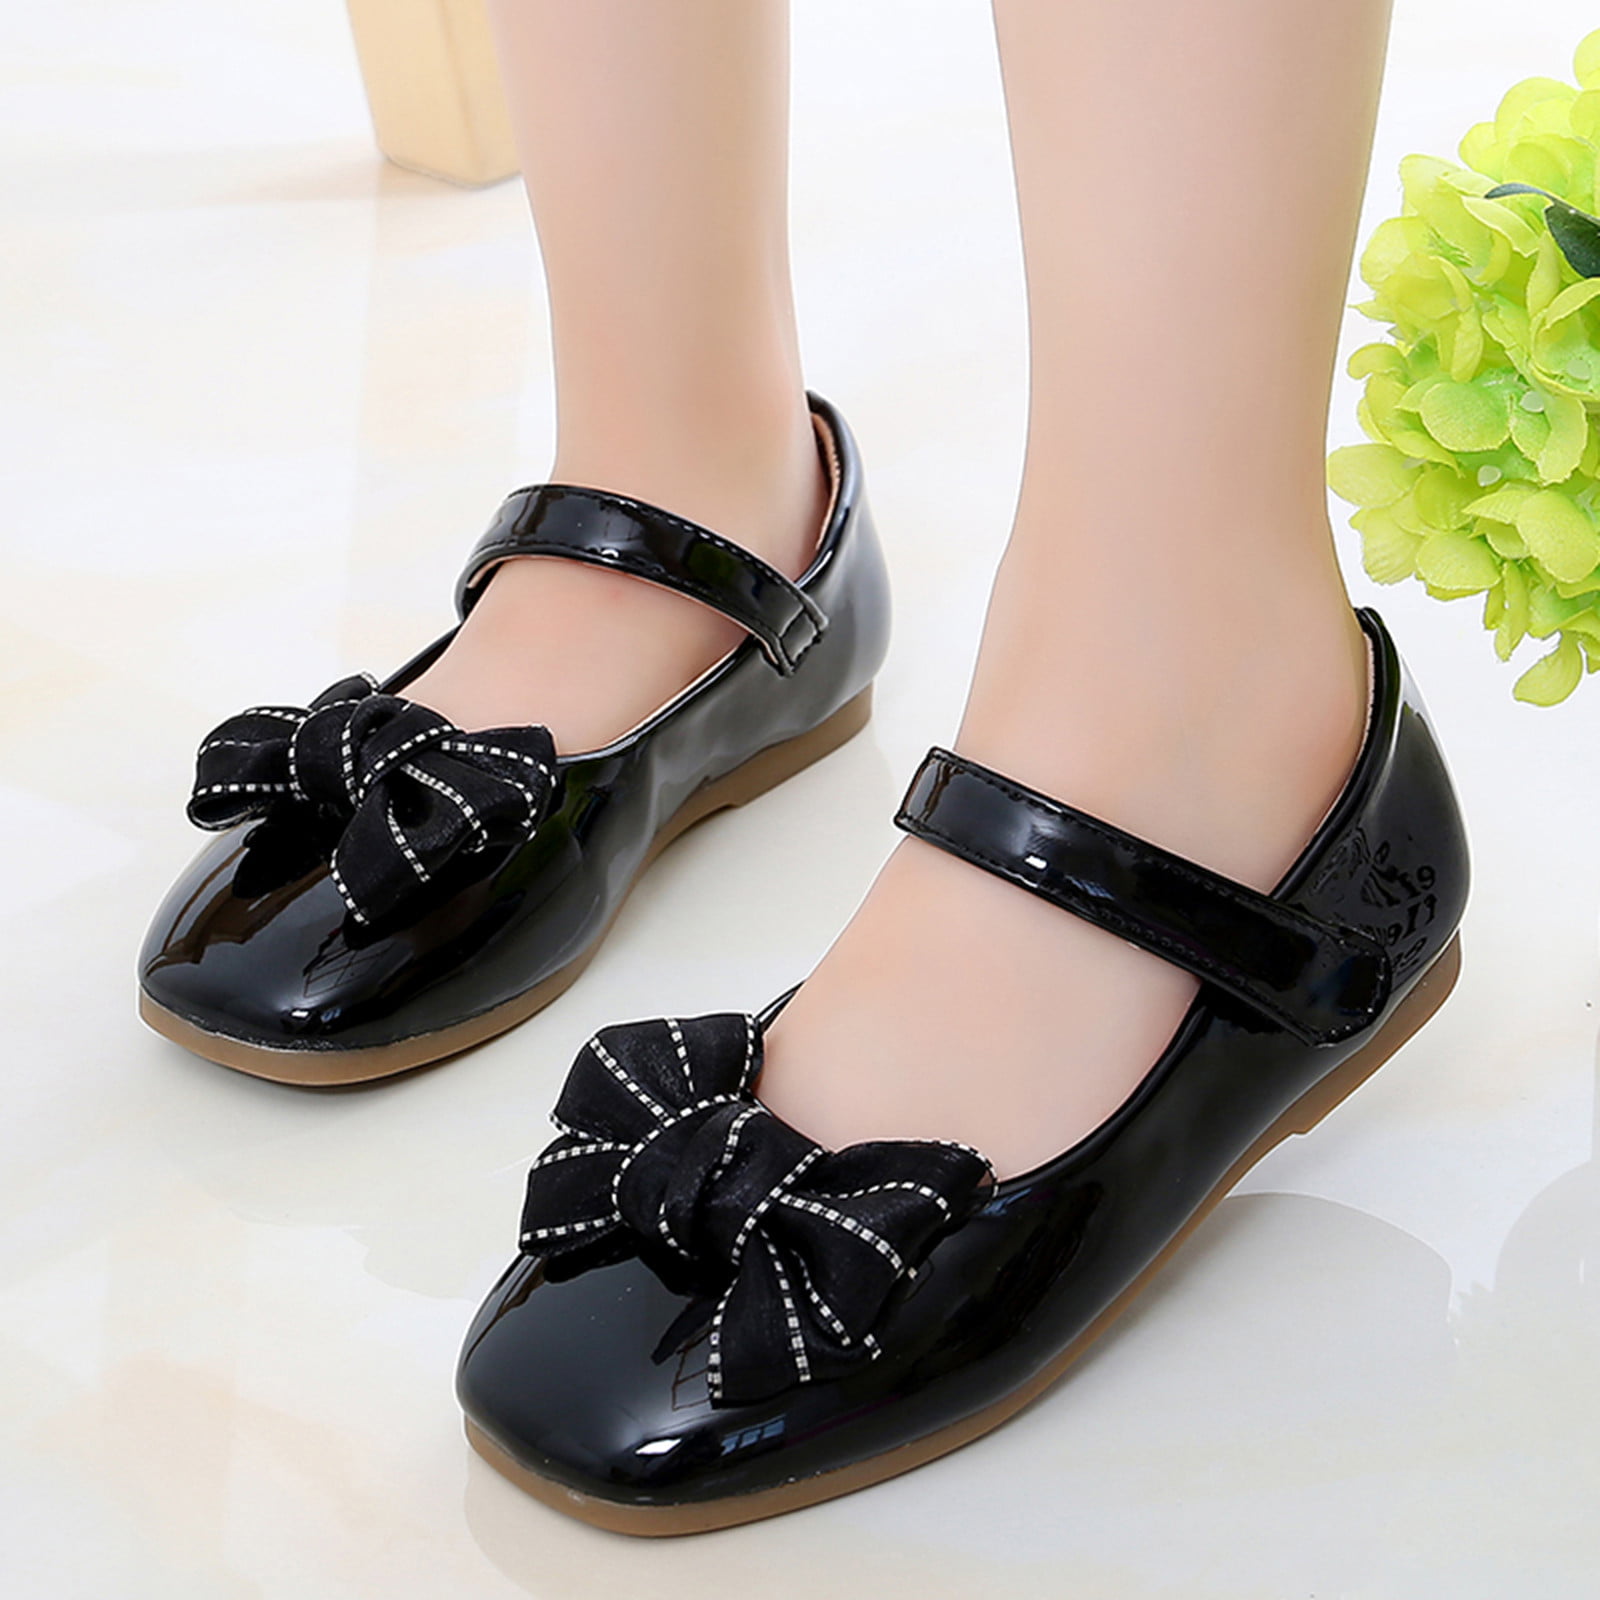 Children Kids Girls Dresses Shoes Baby Princess Flats Bow-knot Casual Soft Shoes 